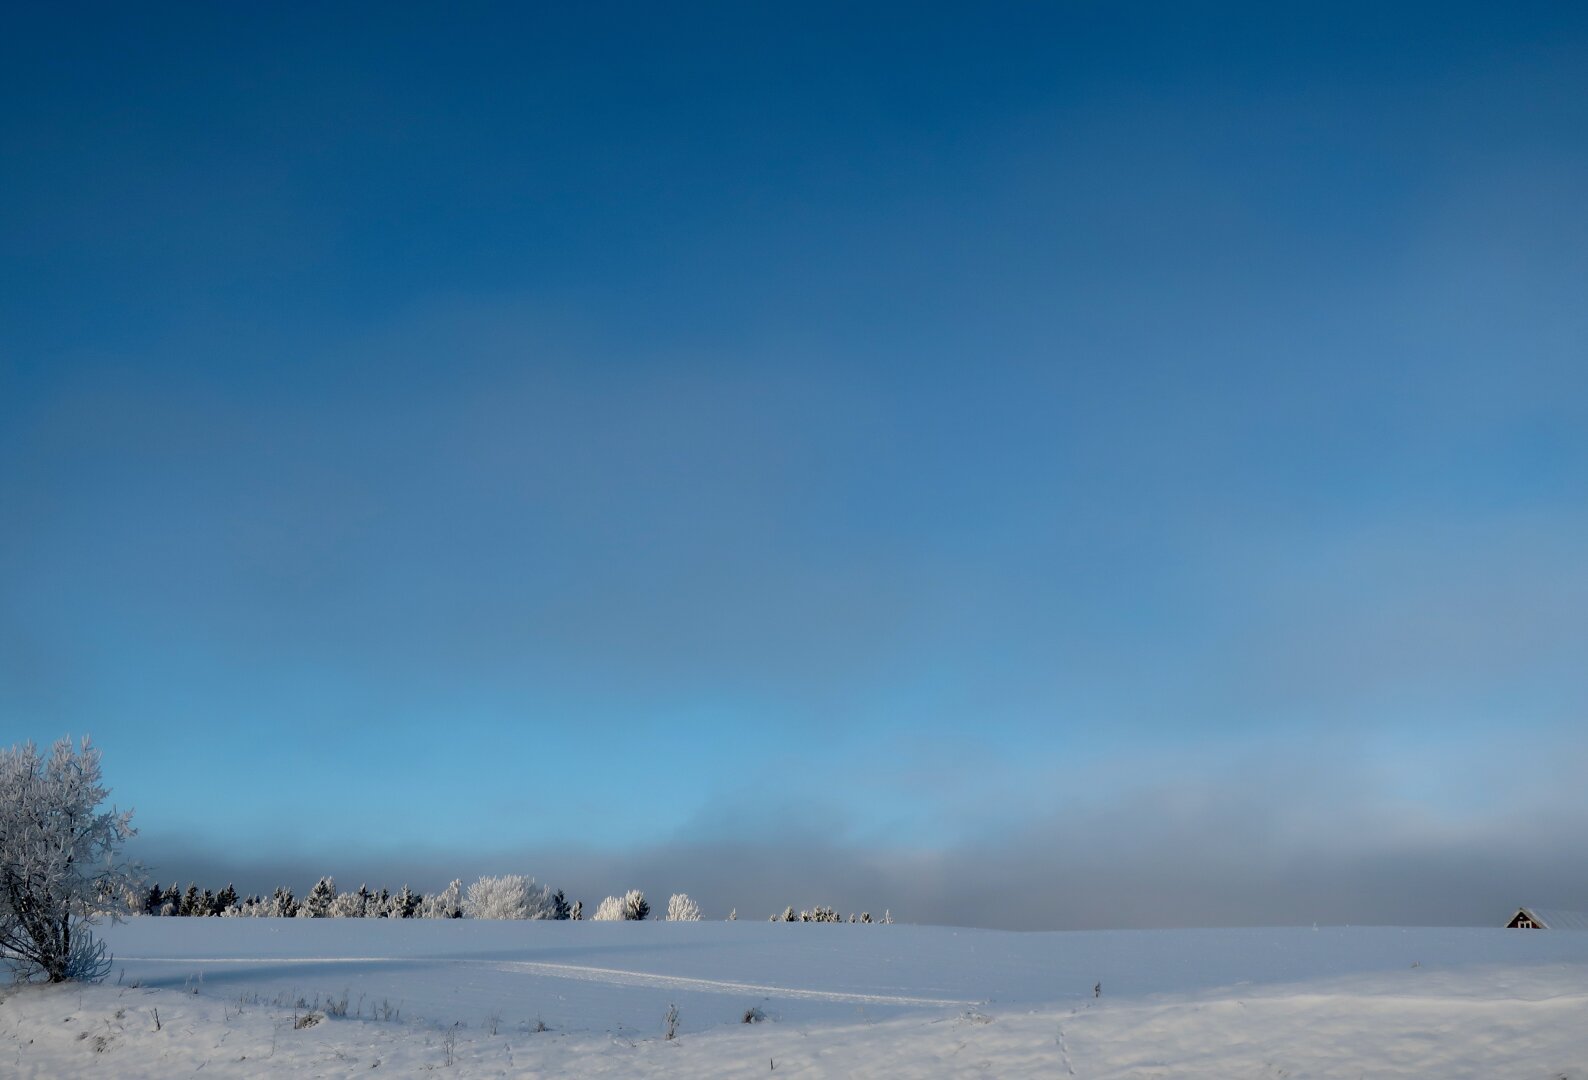 looking over a snow covered field on top of a rolling hill, with a treelike at the horizon. The huge sky is blue with some misty clouds coming up from the other side of the hill. It's cold and the birches are frozen white, while the pie trees look black against the white. In the right lower corner, the tip of a red barn with two small windows is visible, making it look like the barn is looking over the field.